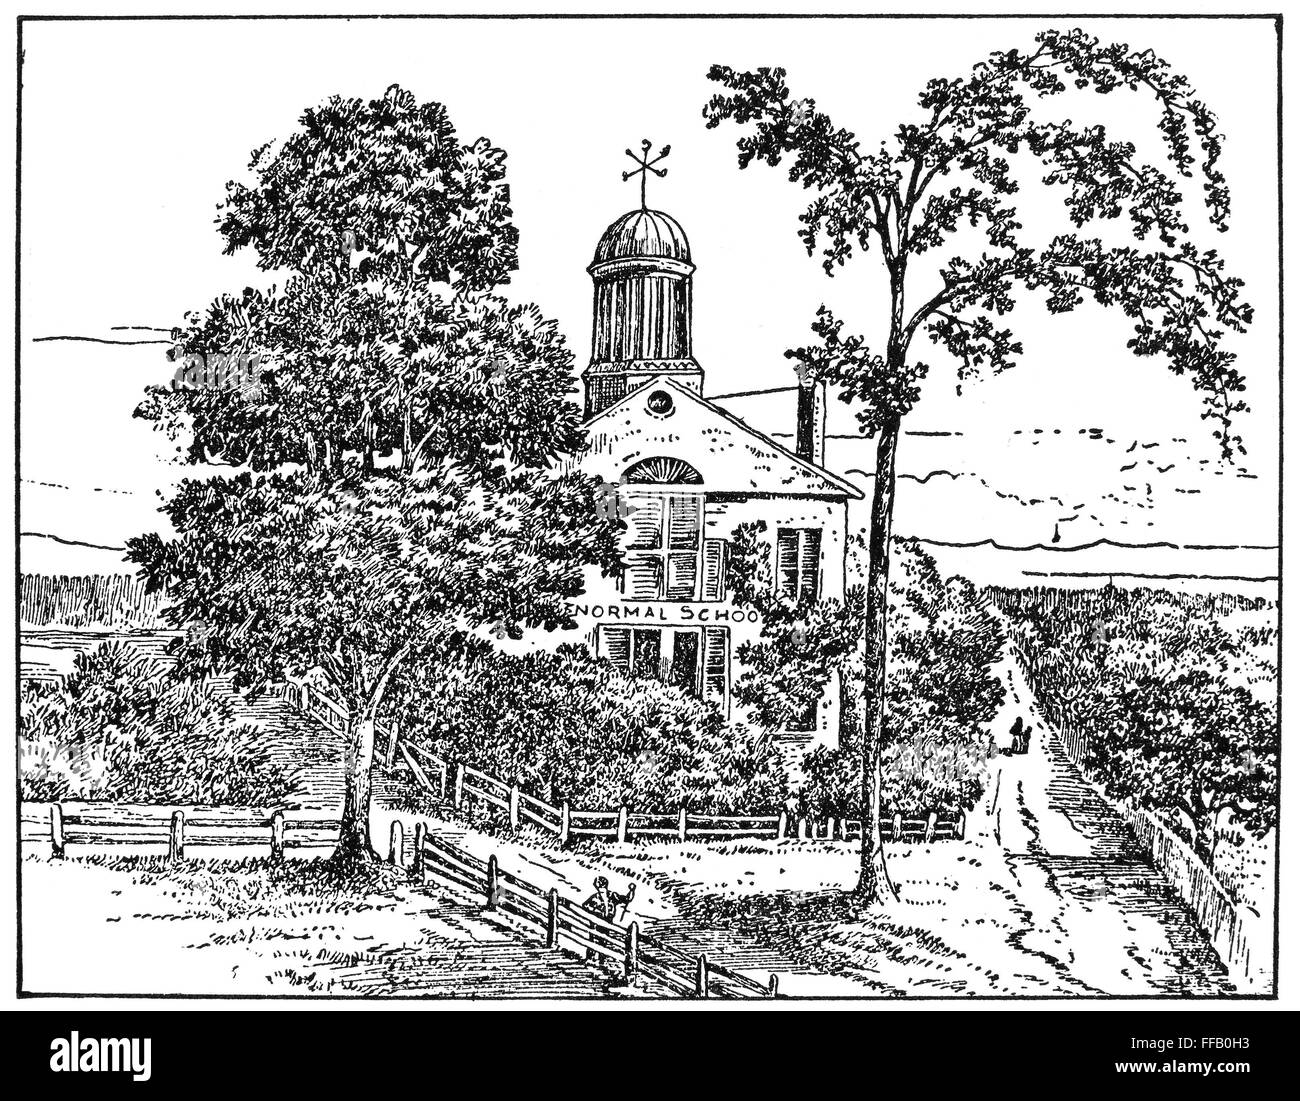 FIRST STATE NORMAL SCHOOL. /nA two year school that trains teachers in elementary grades. Opened 4 July 1839 in Lexington, Massachusetts. Stock Photo